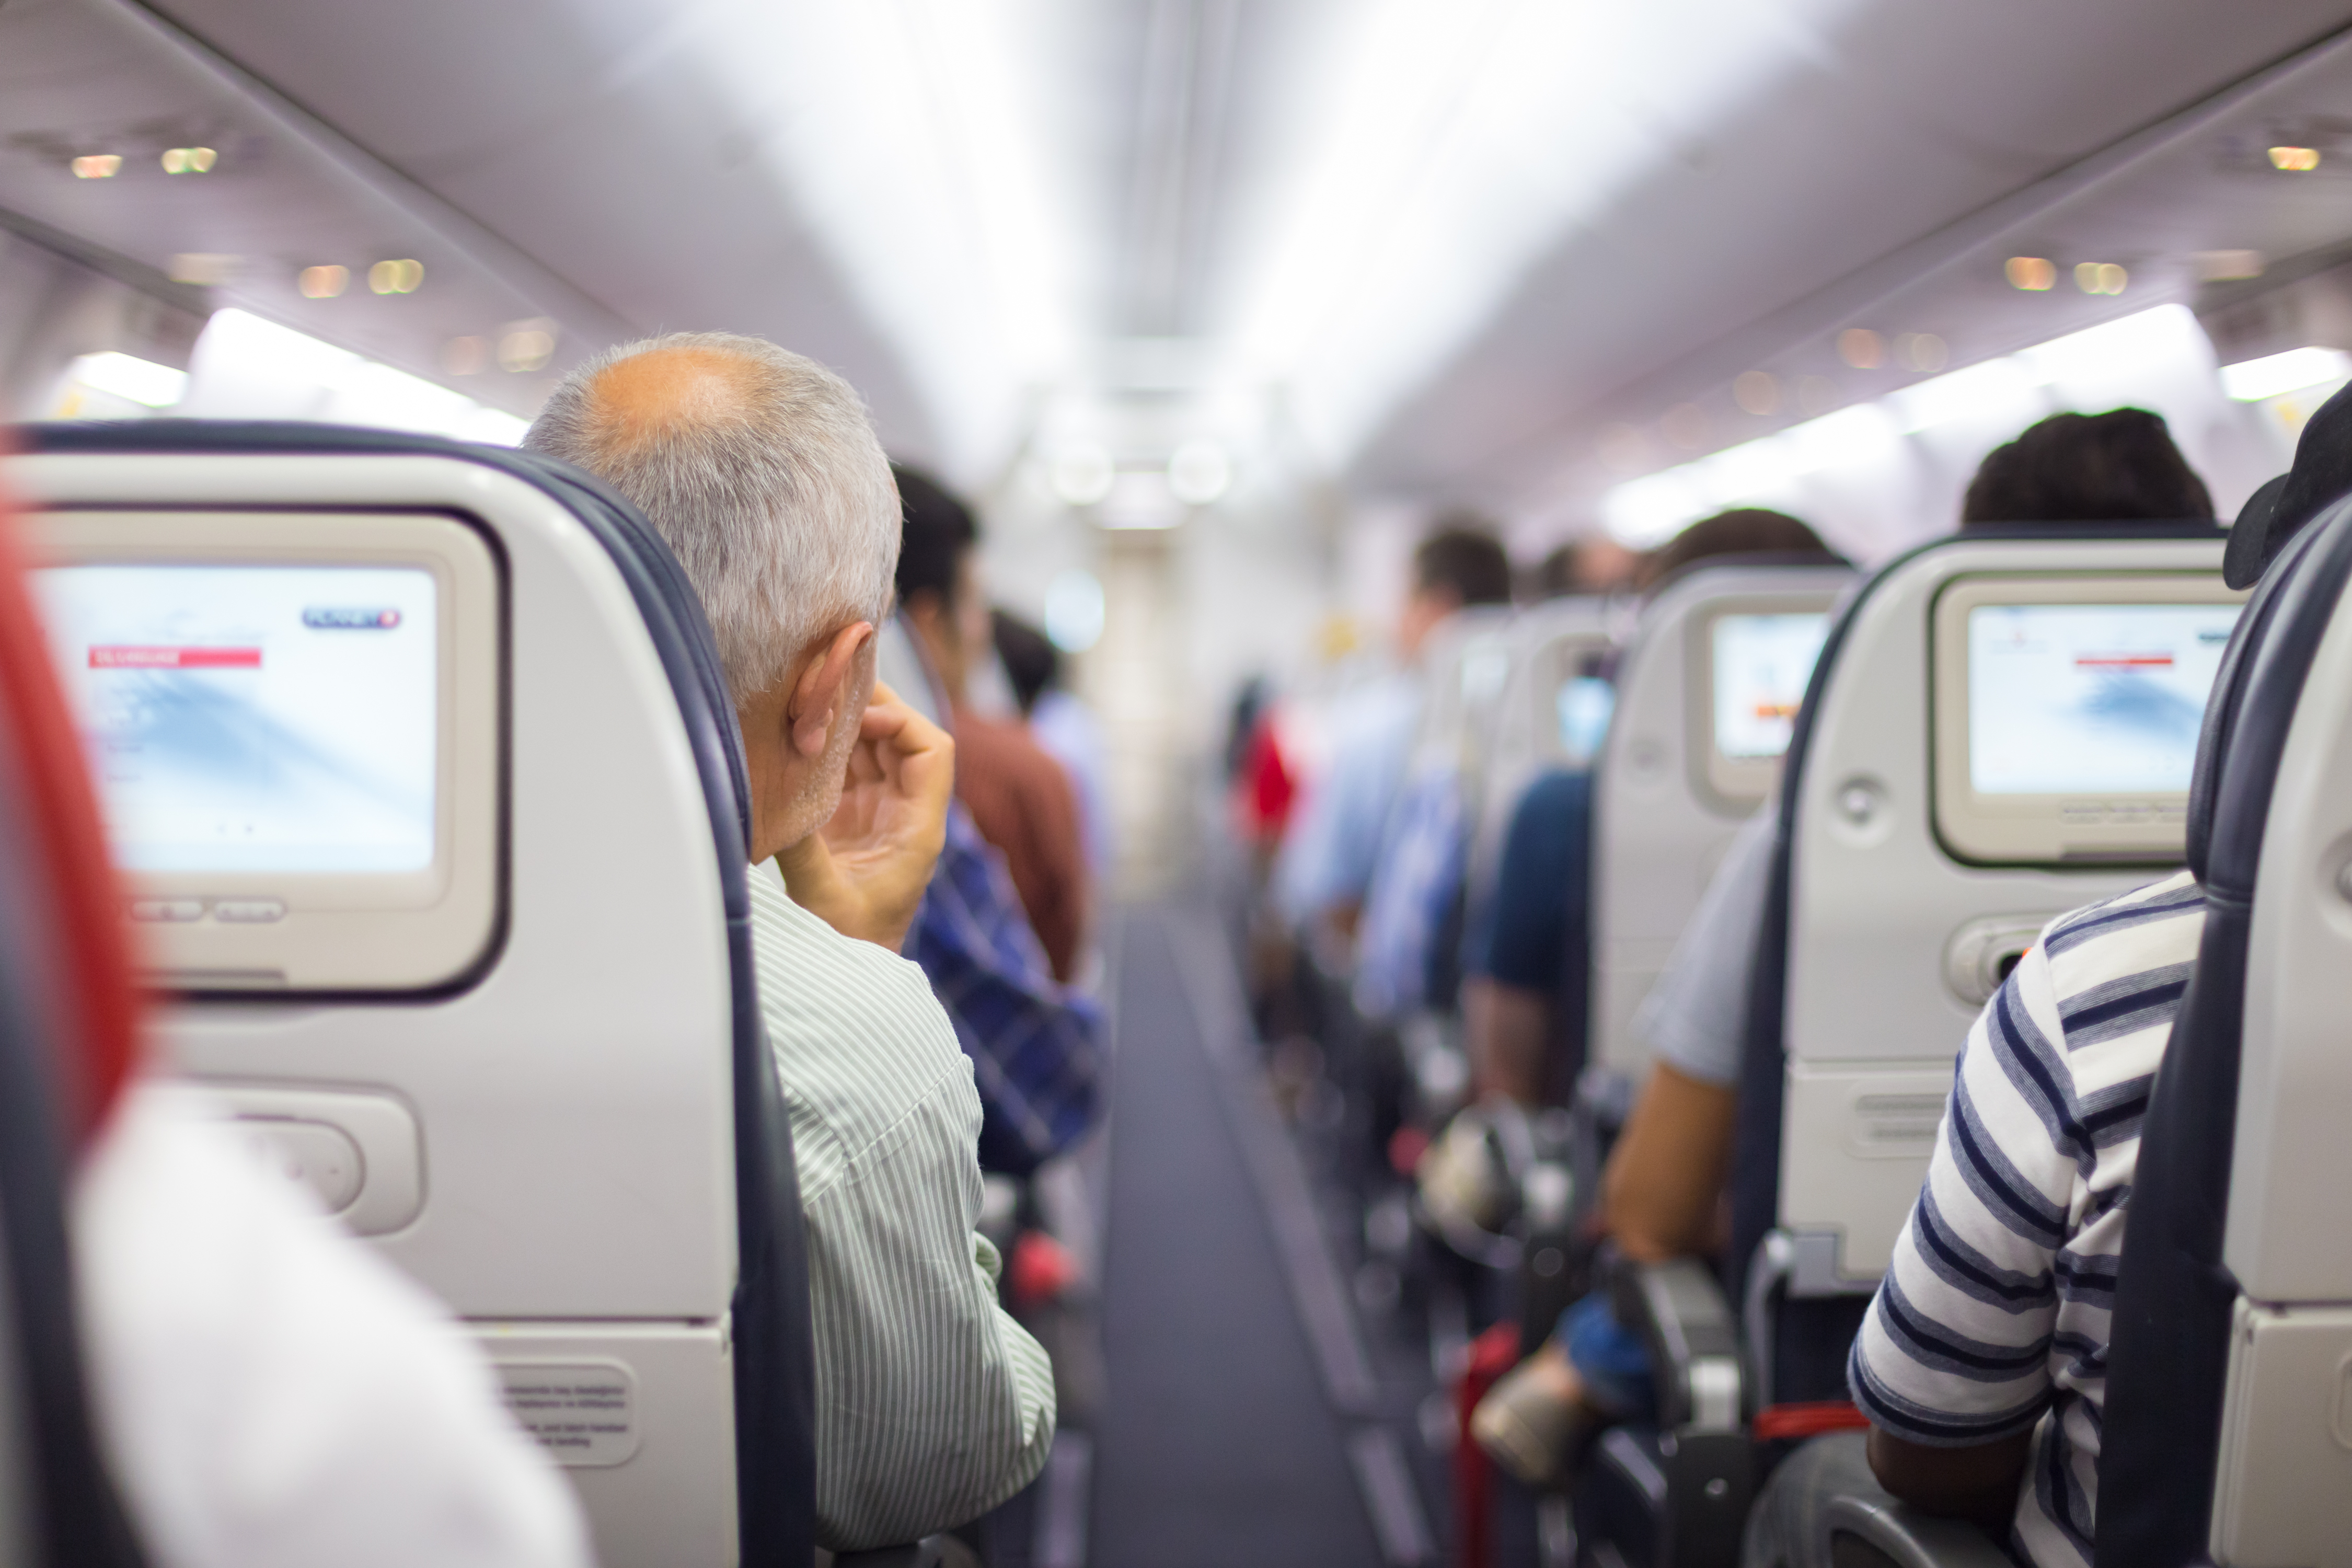 Interior of airplane with passengers on seats waiting to taik off. | Source: Shutterstock